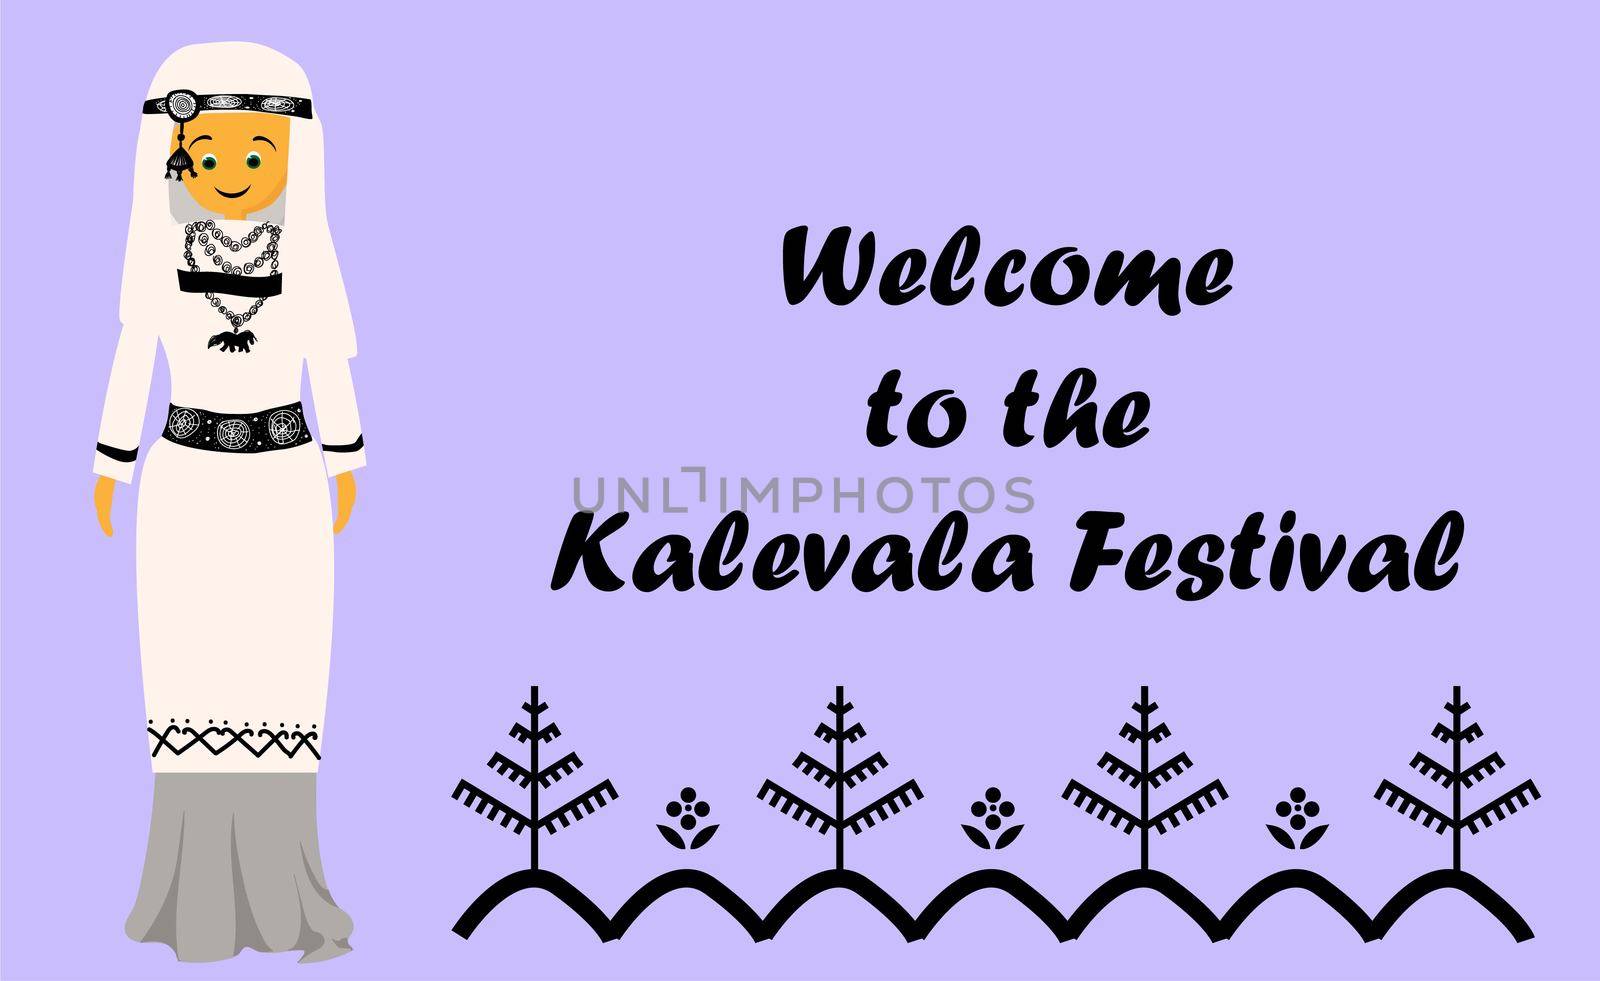 Kalevala. Finnish epic. Kalevala festival. Carnival. The peoples of the north.